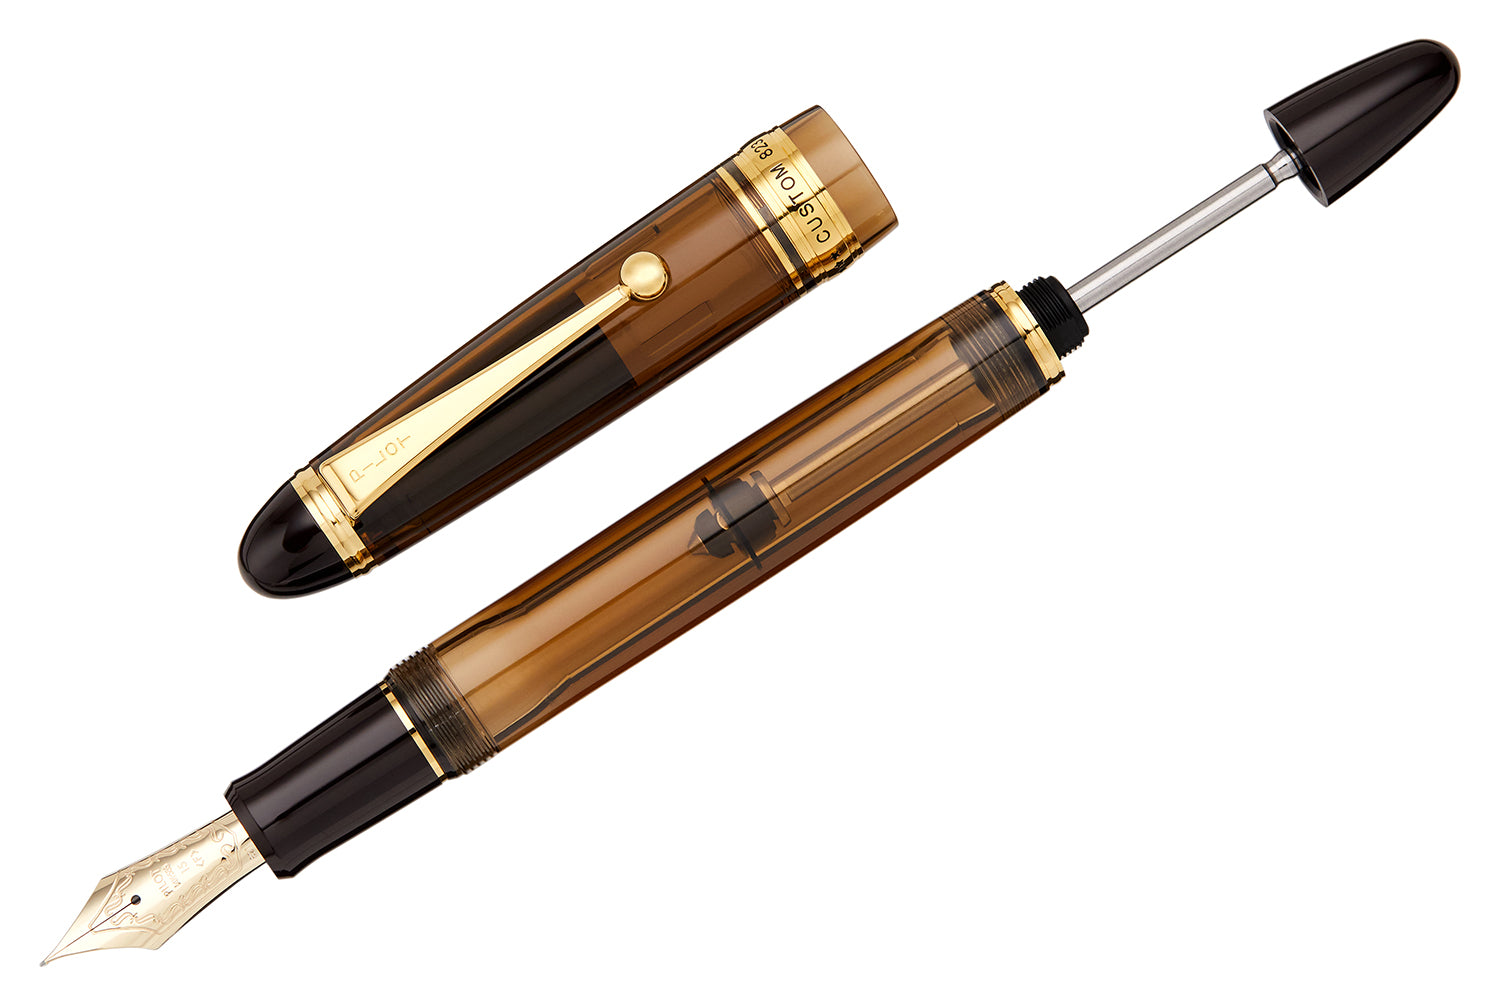 A translucent brown Pilot fountain pen with the cap off and vacuum rod extended